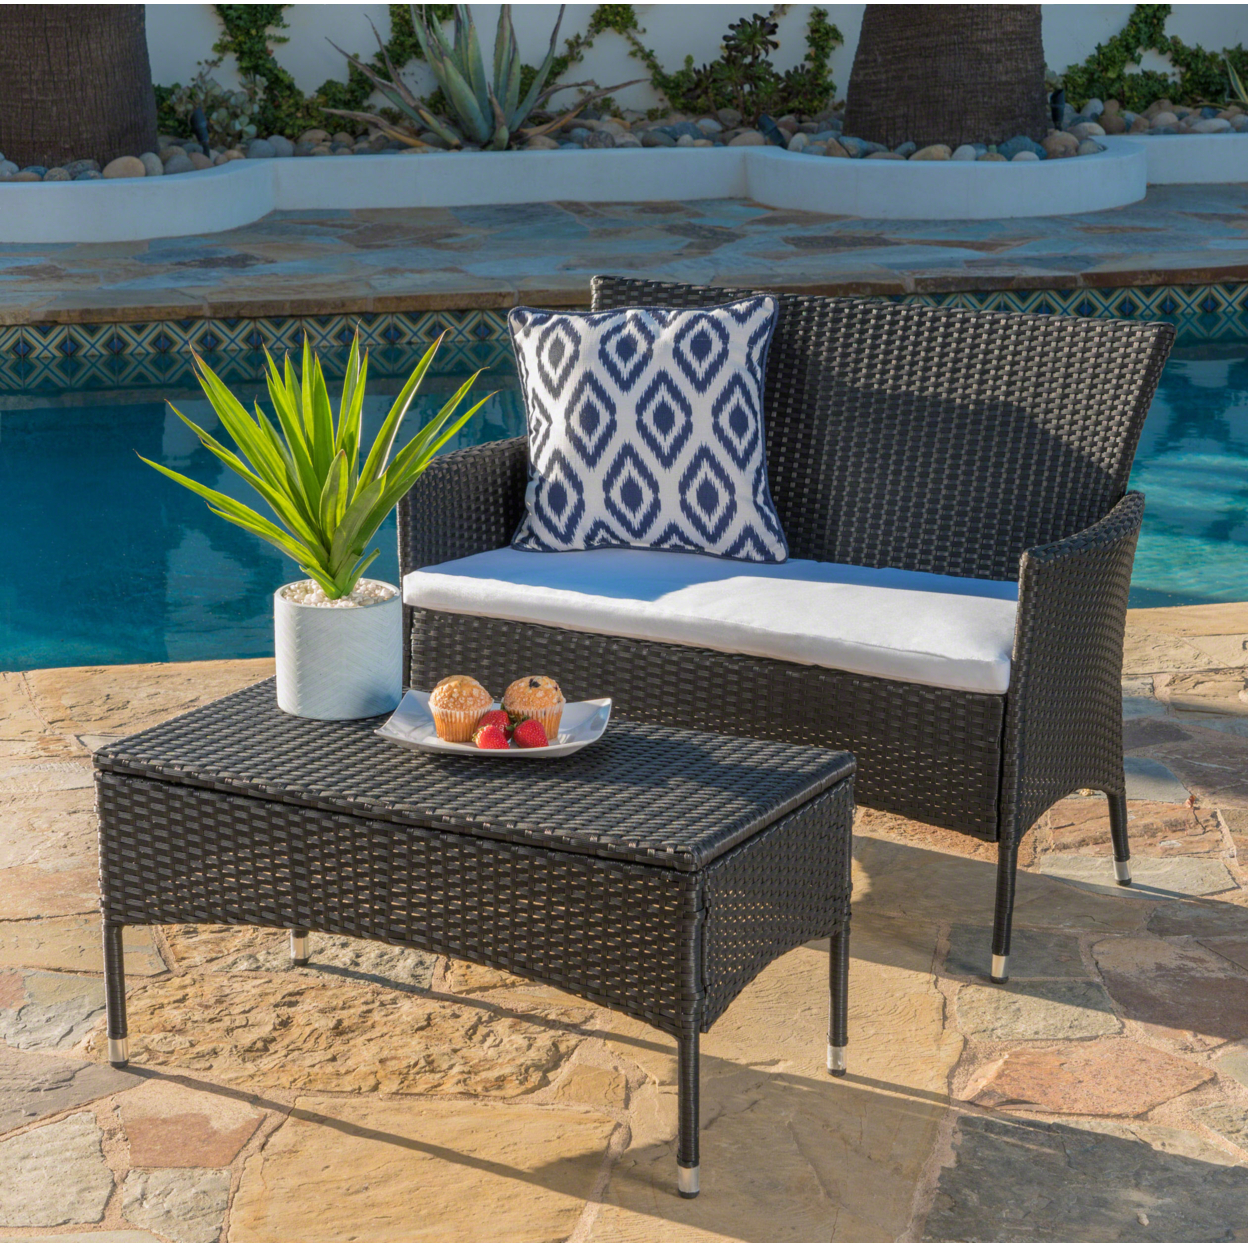 Montague Outdoor Wicker Loveseat And Coffee Table Set - Black / White